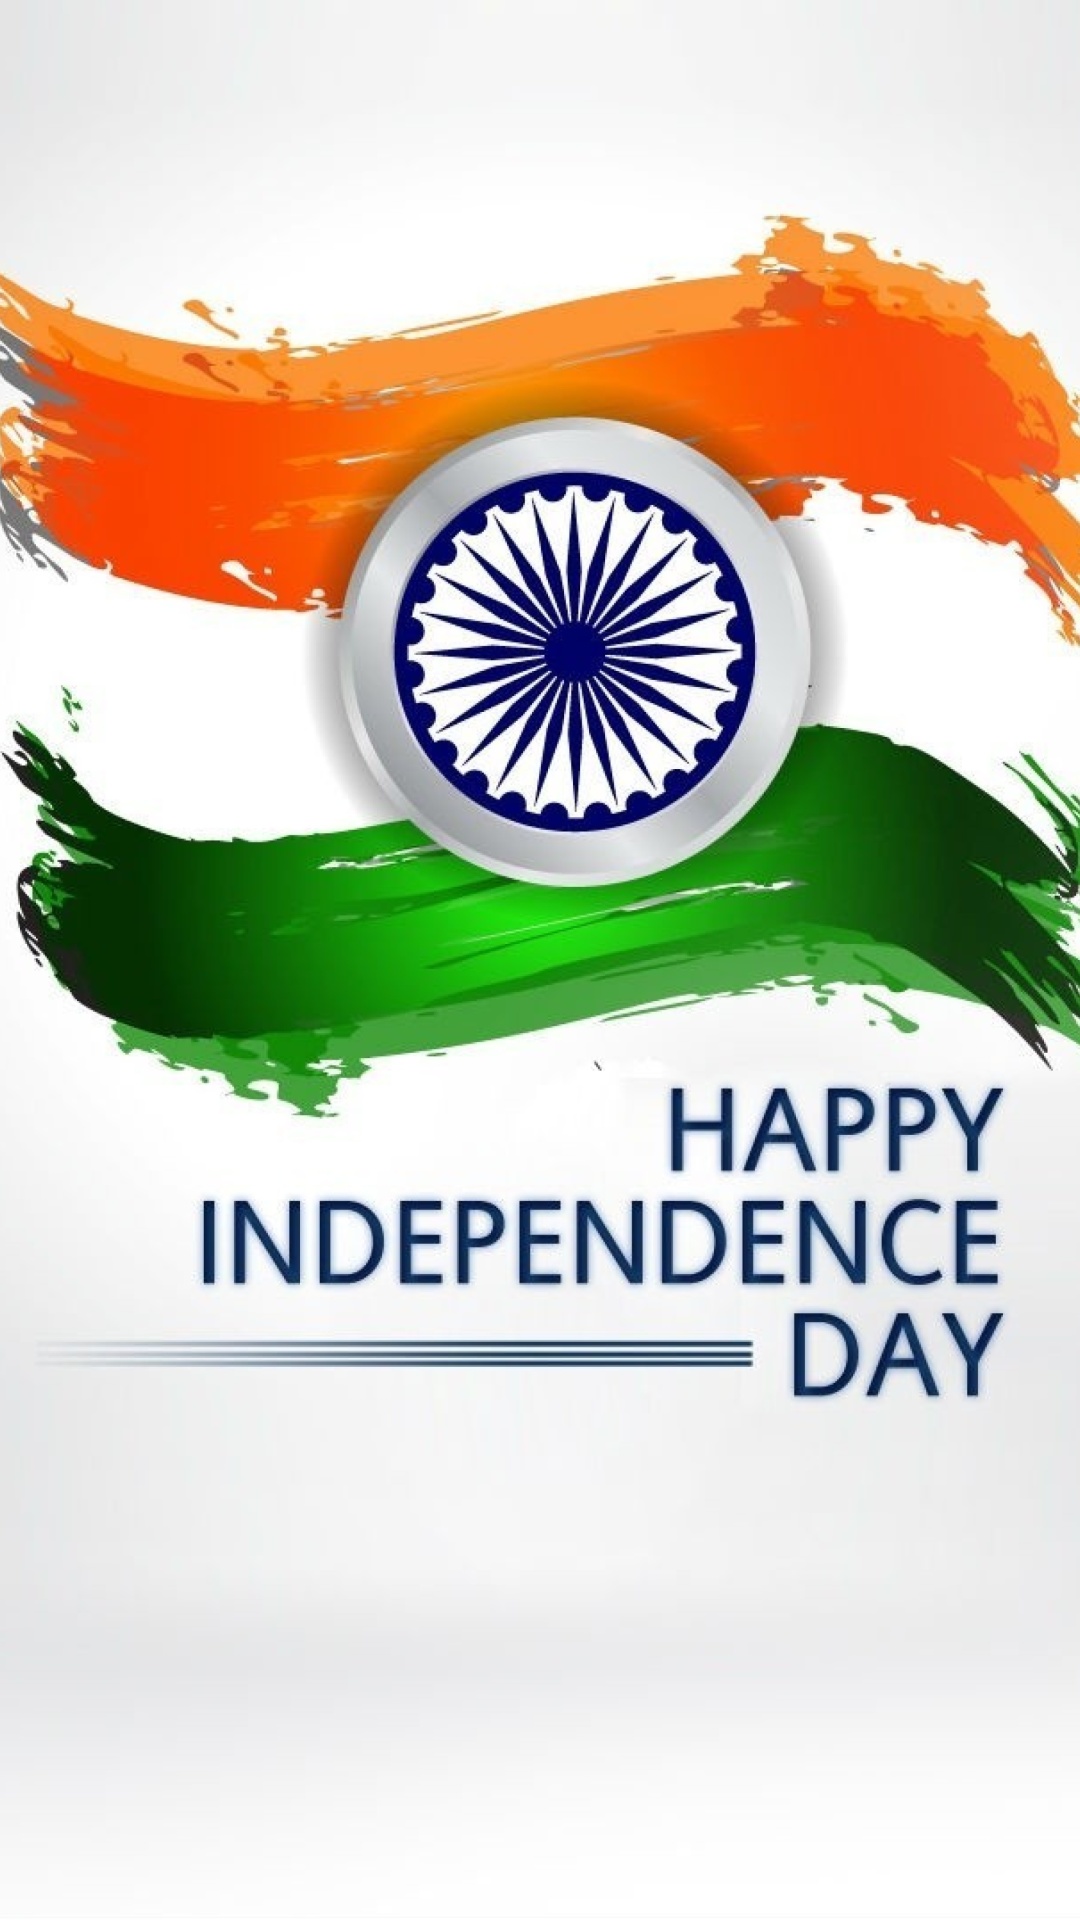 Independence Day India wallpaper 1080x1920